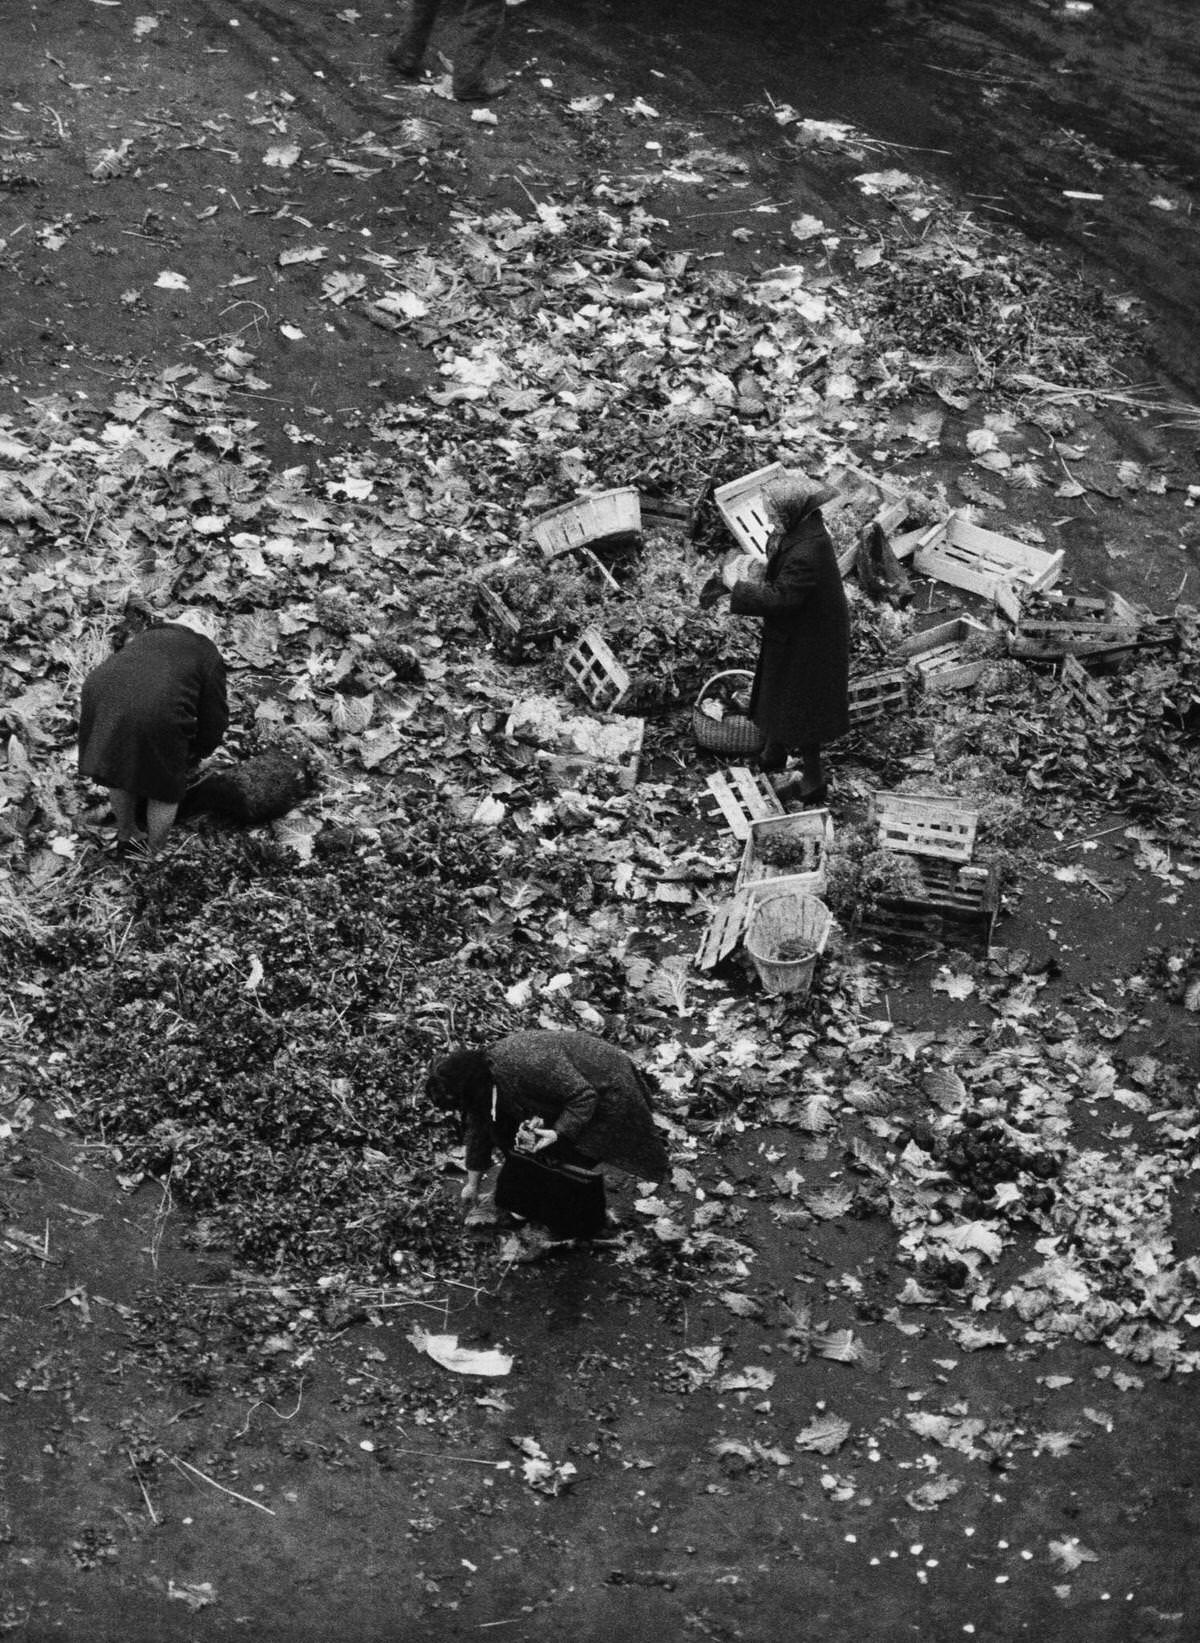 The Poor Collecting Remains, Les Halles, 1960s